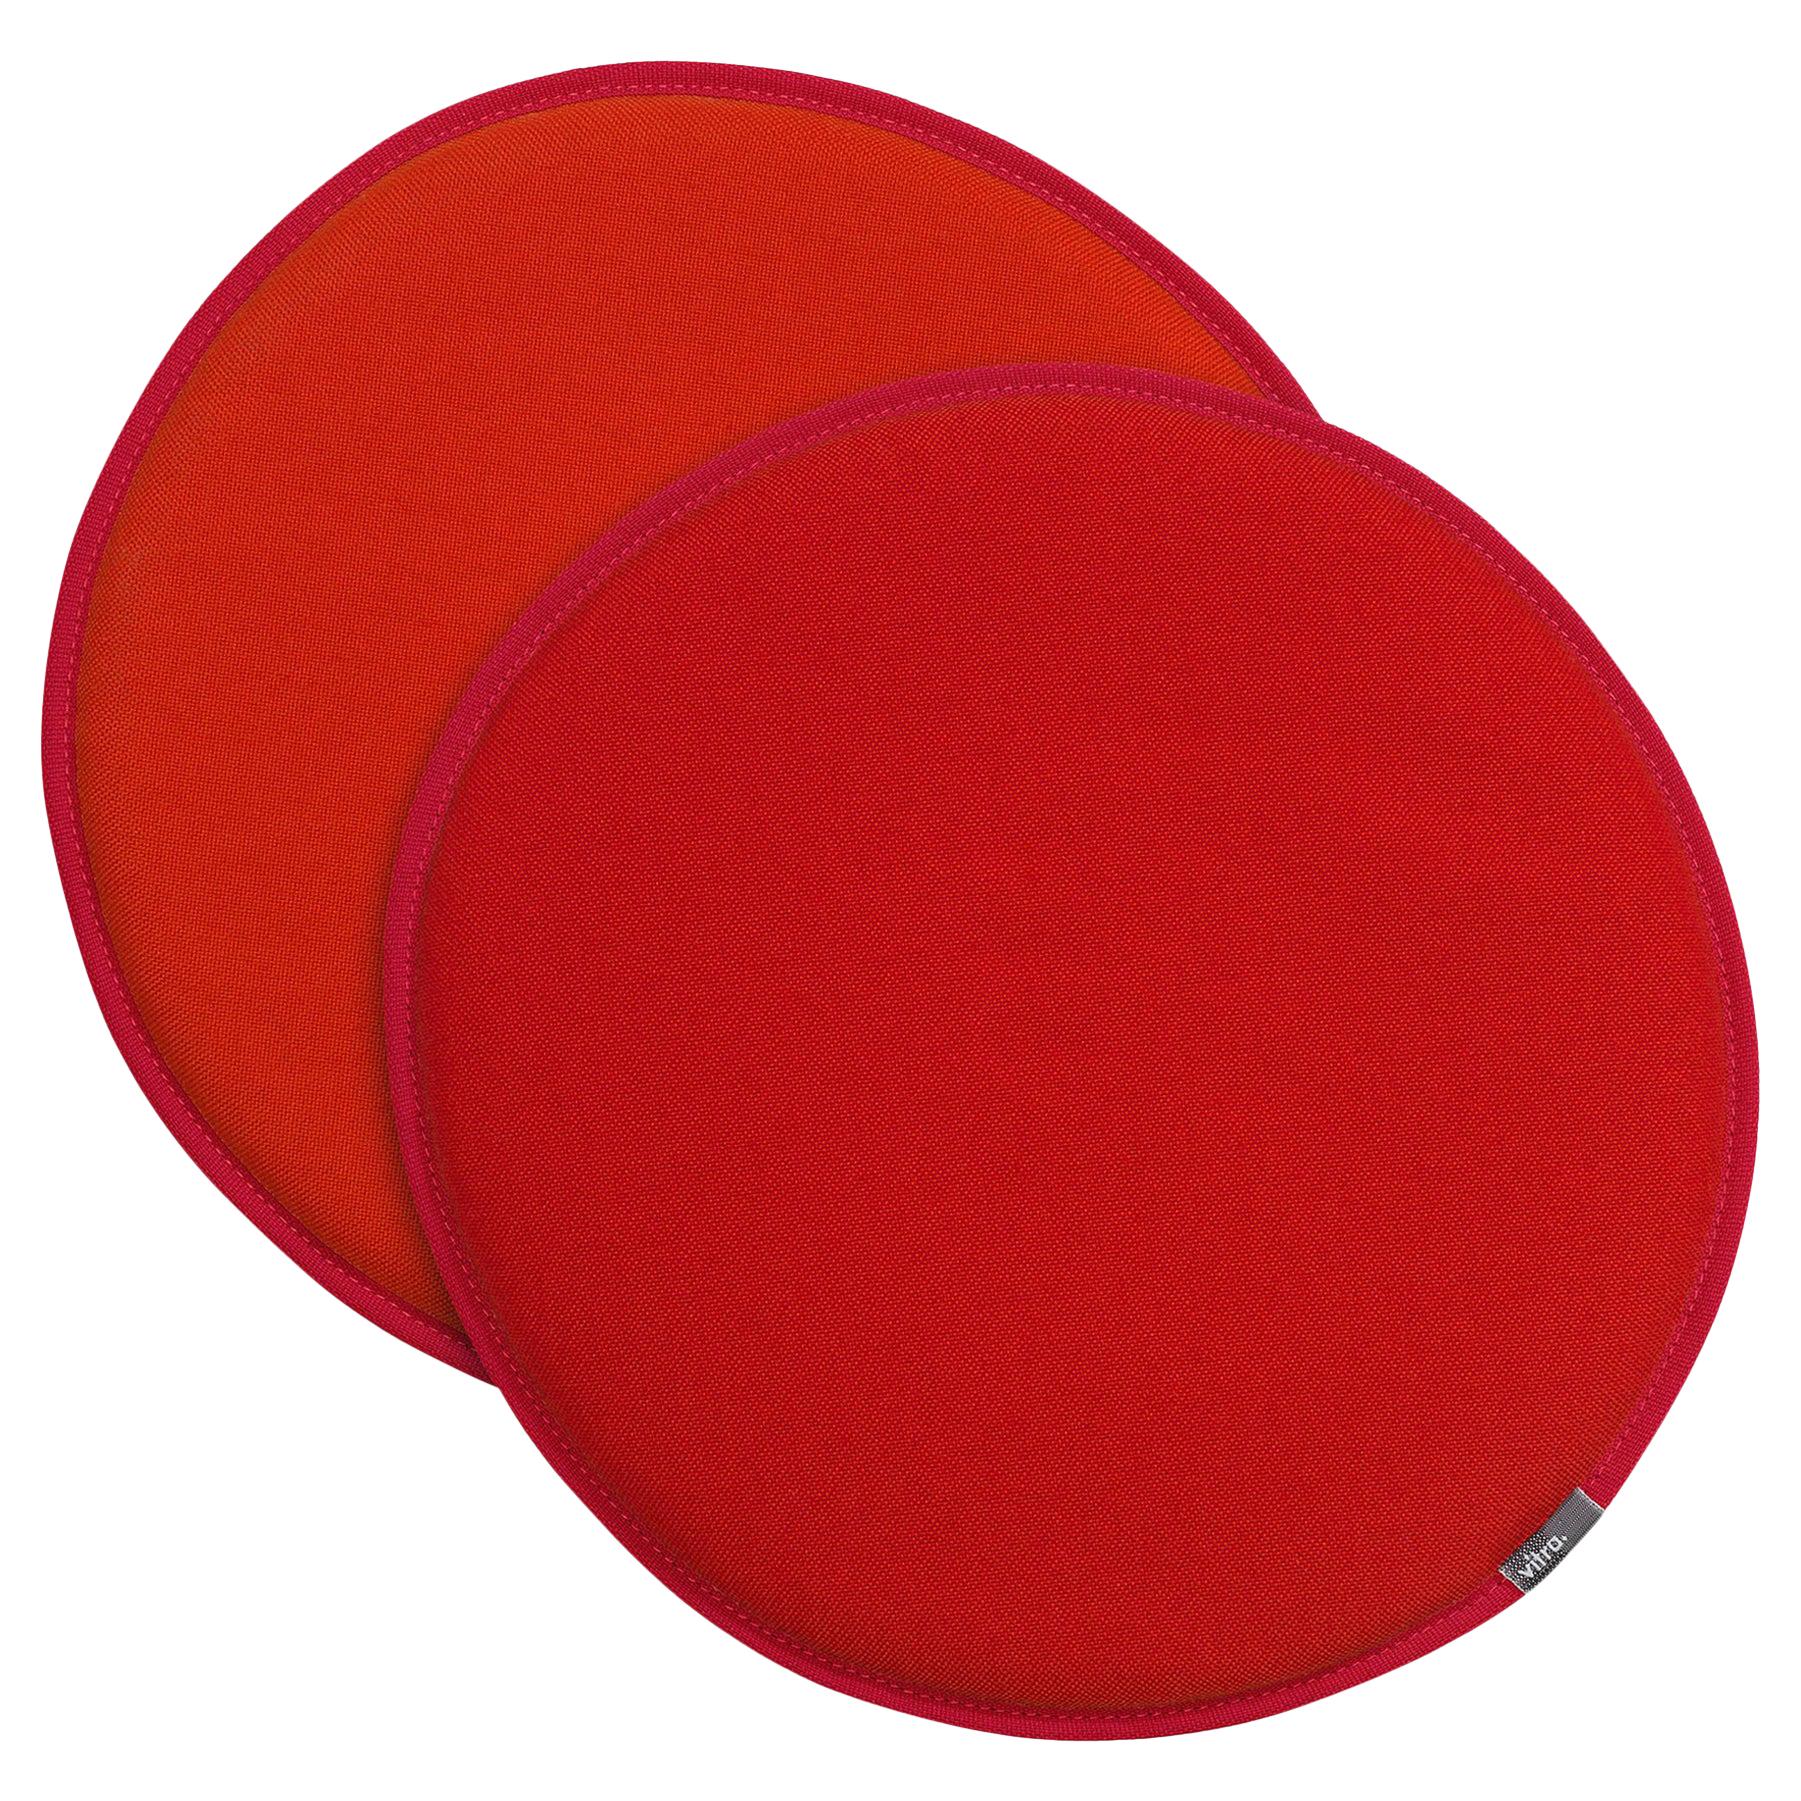 Vitra Seat Dots in Red and Poppy Red and Orange by Hella Jongerius For Sale